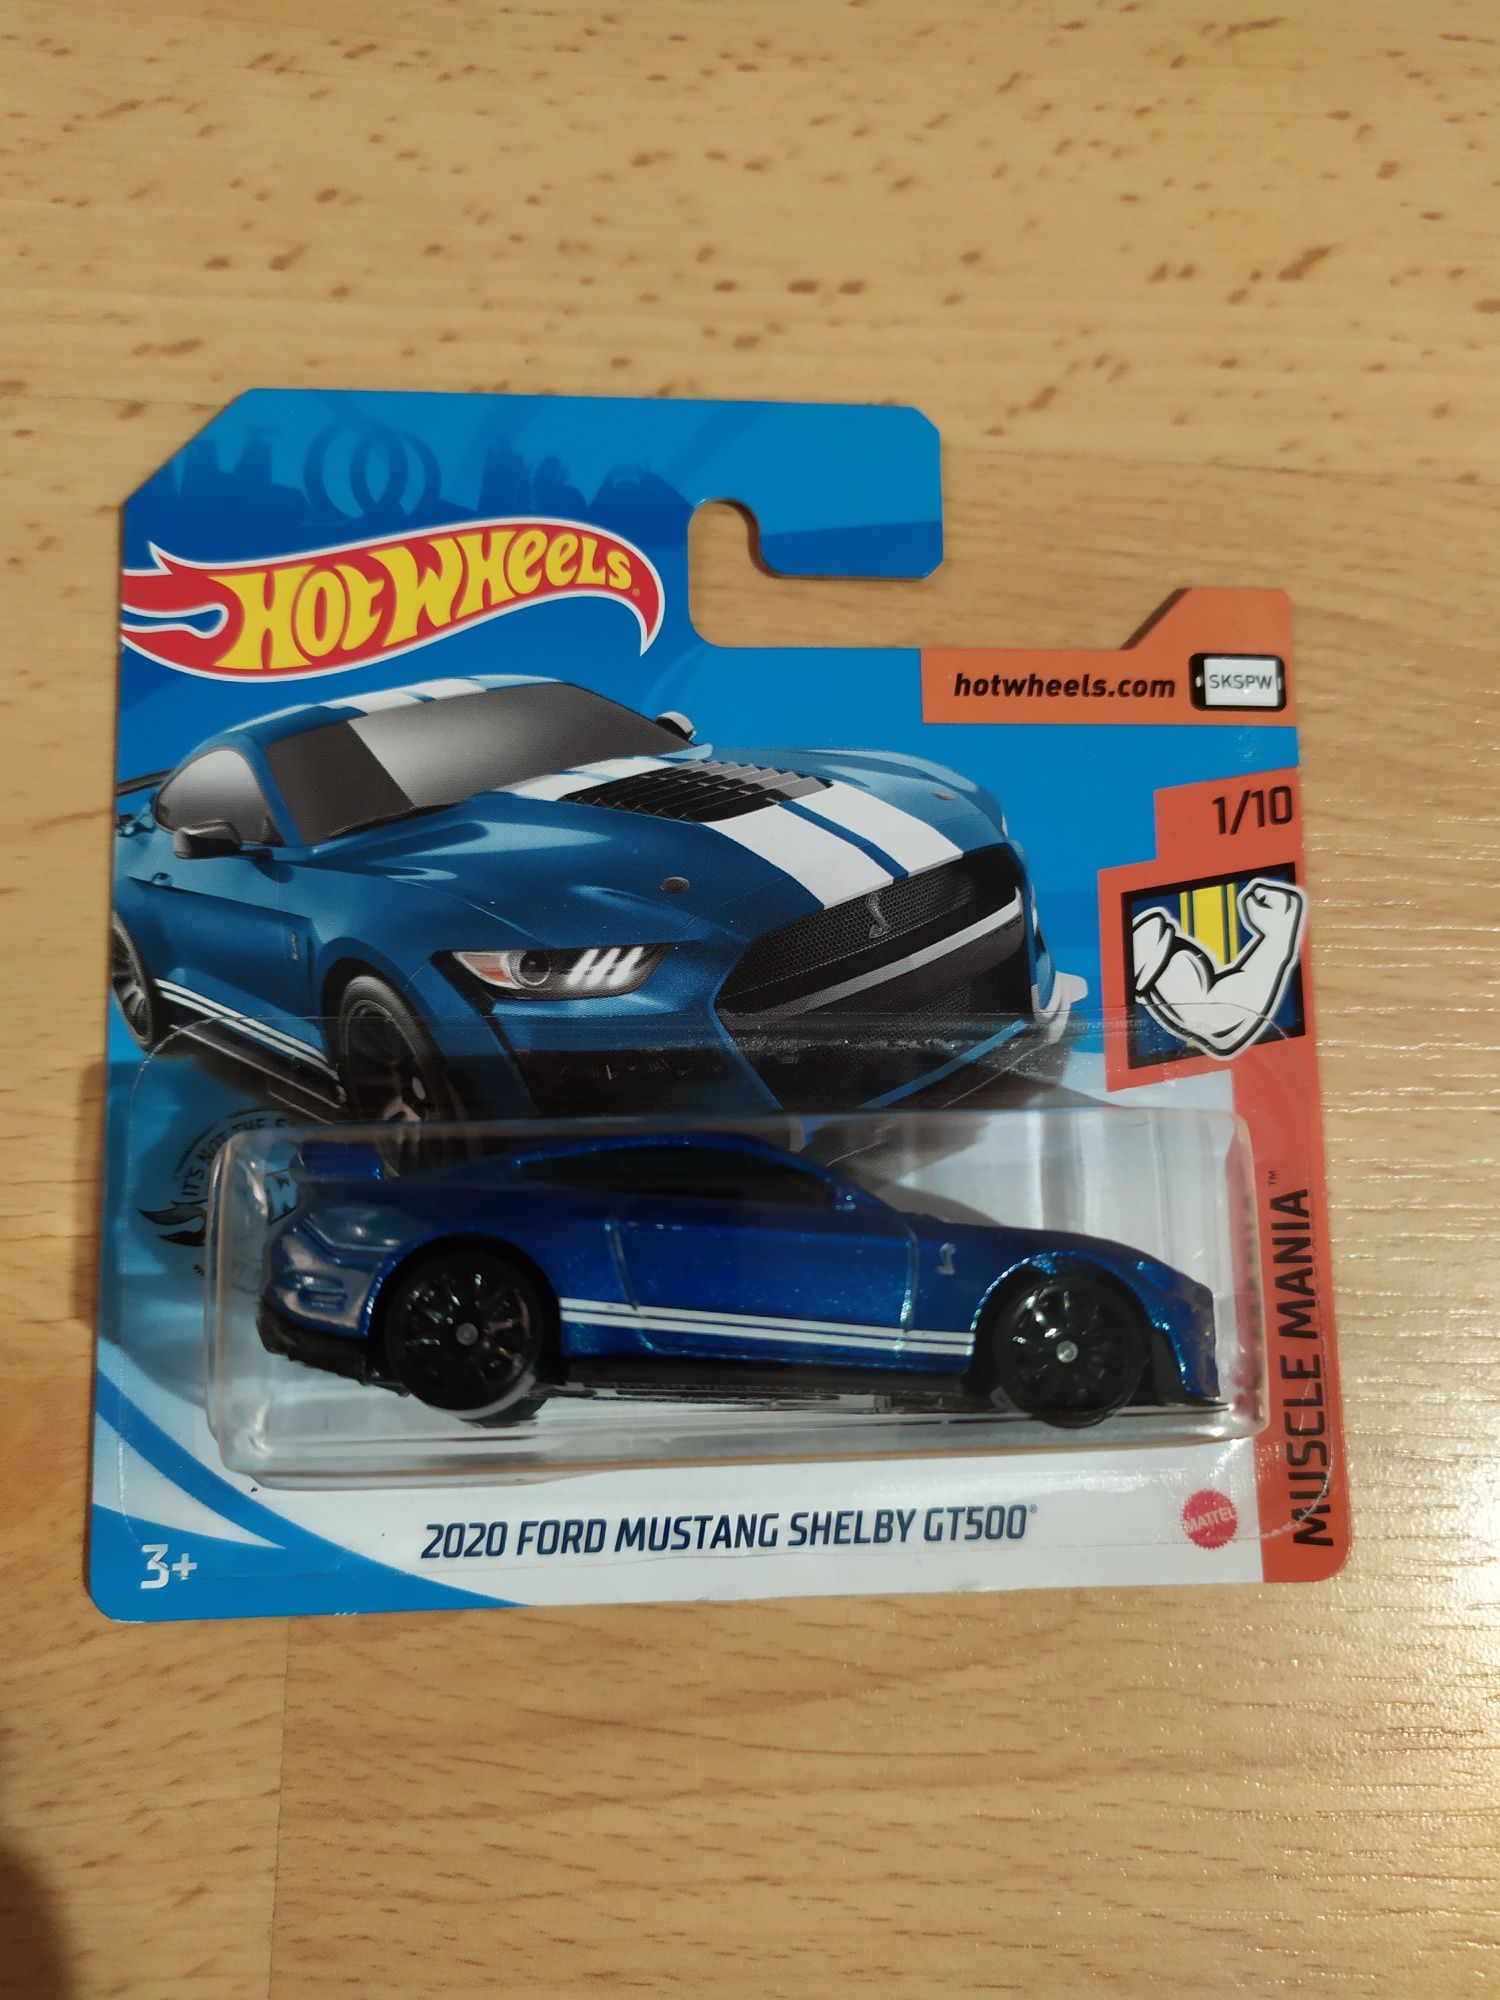 Hot Wheels 2020 Ford Mustang Schelby GT500